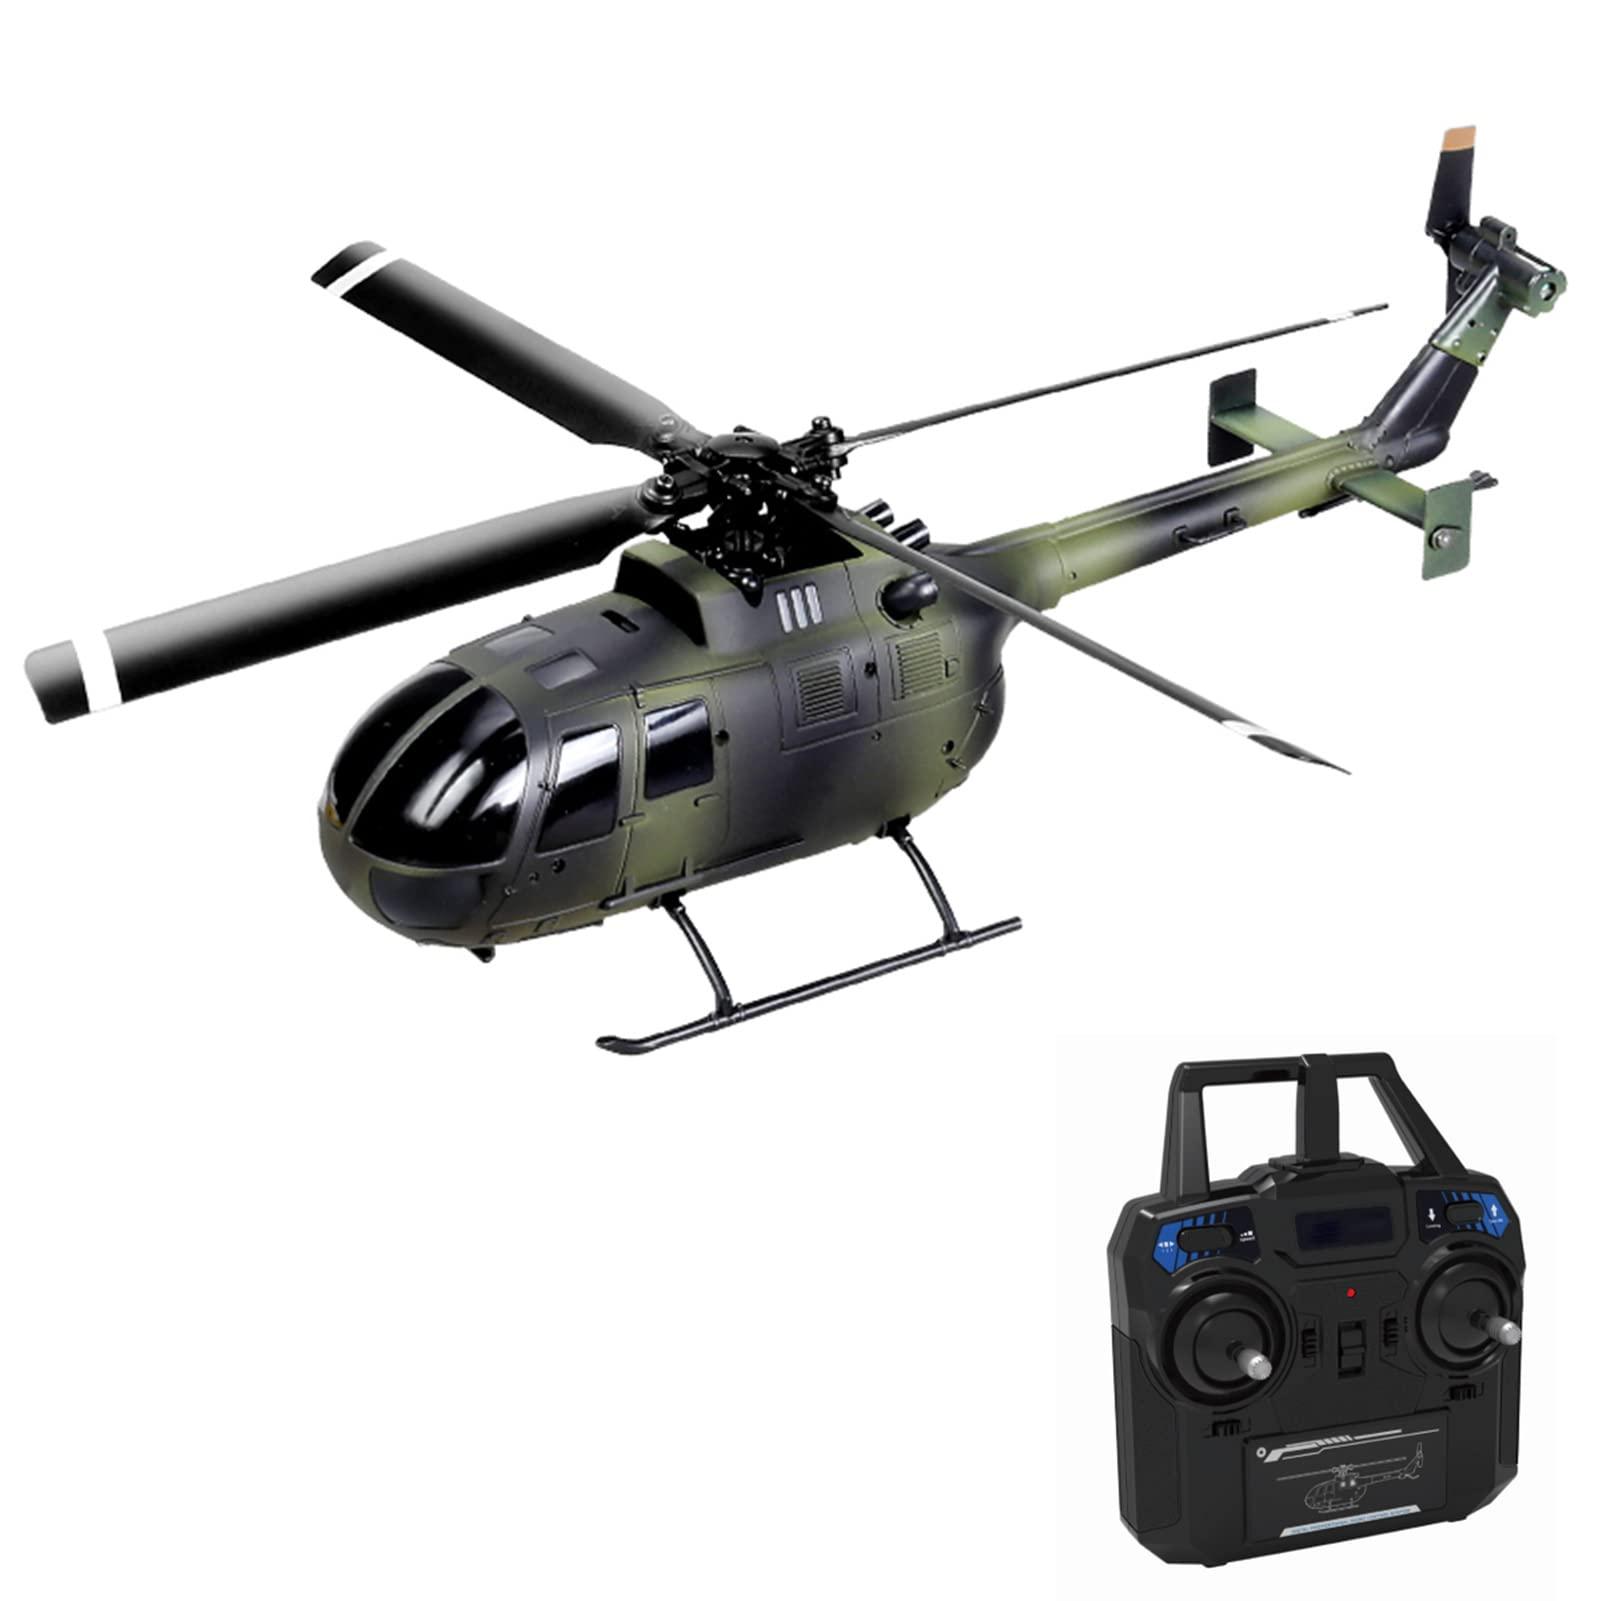 1/6 Rc Helicopter: Top Brands for 1/6 RC Helicopters 